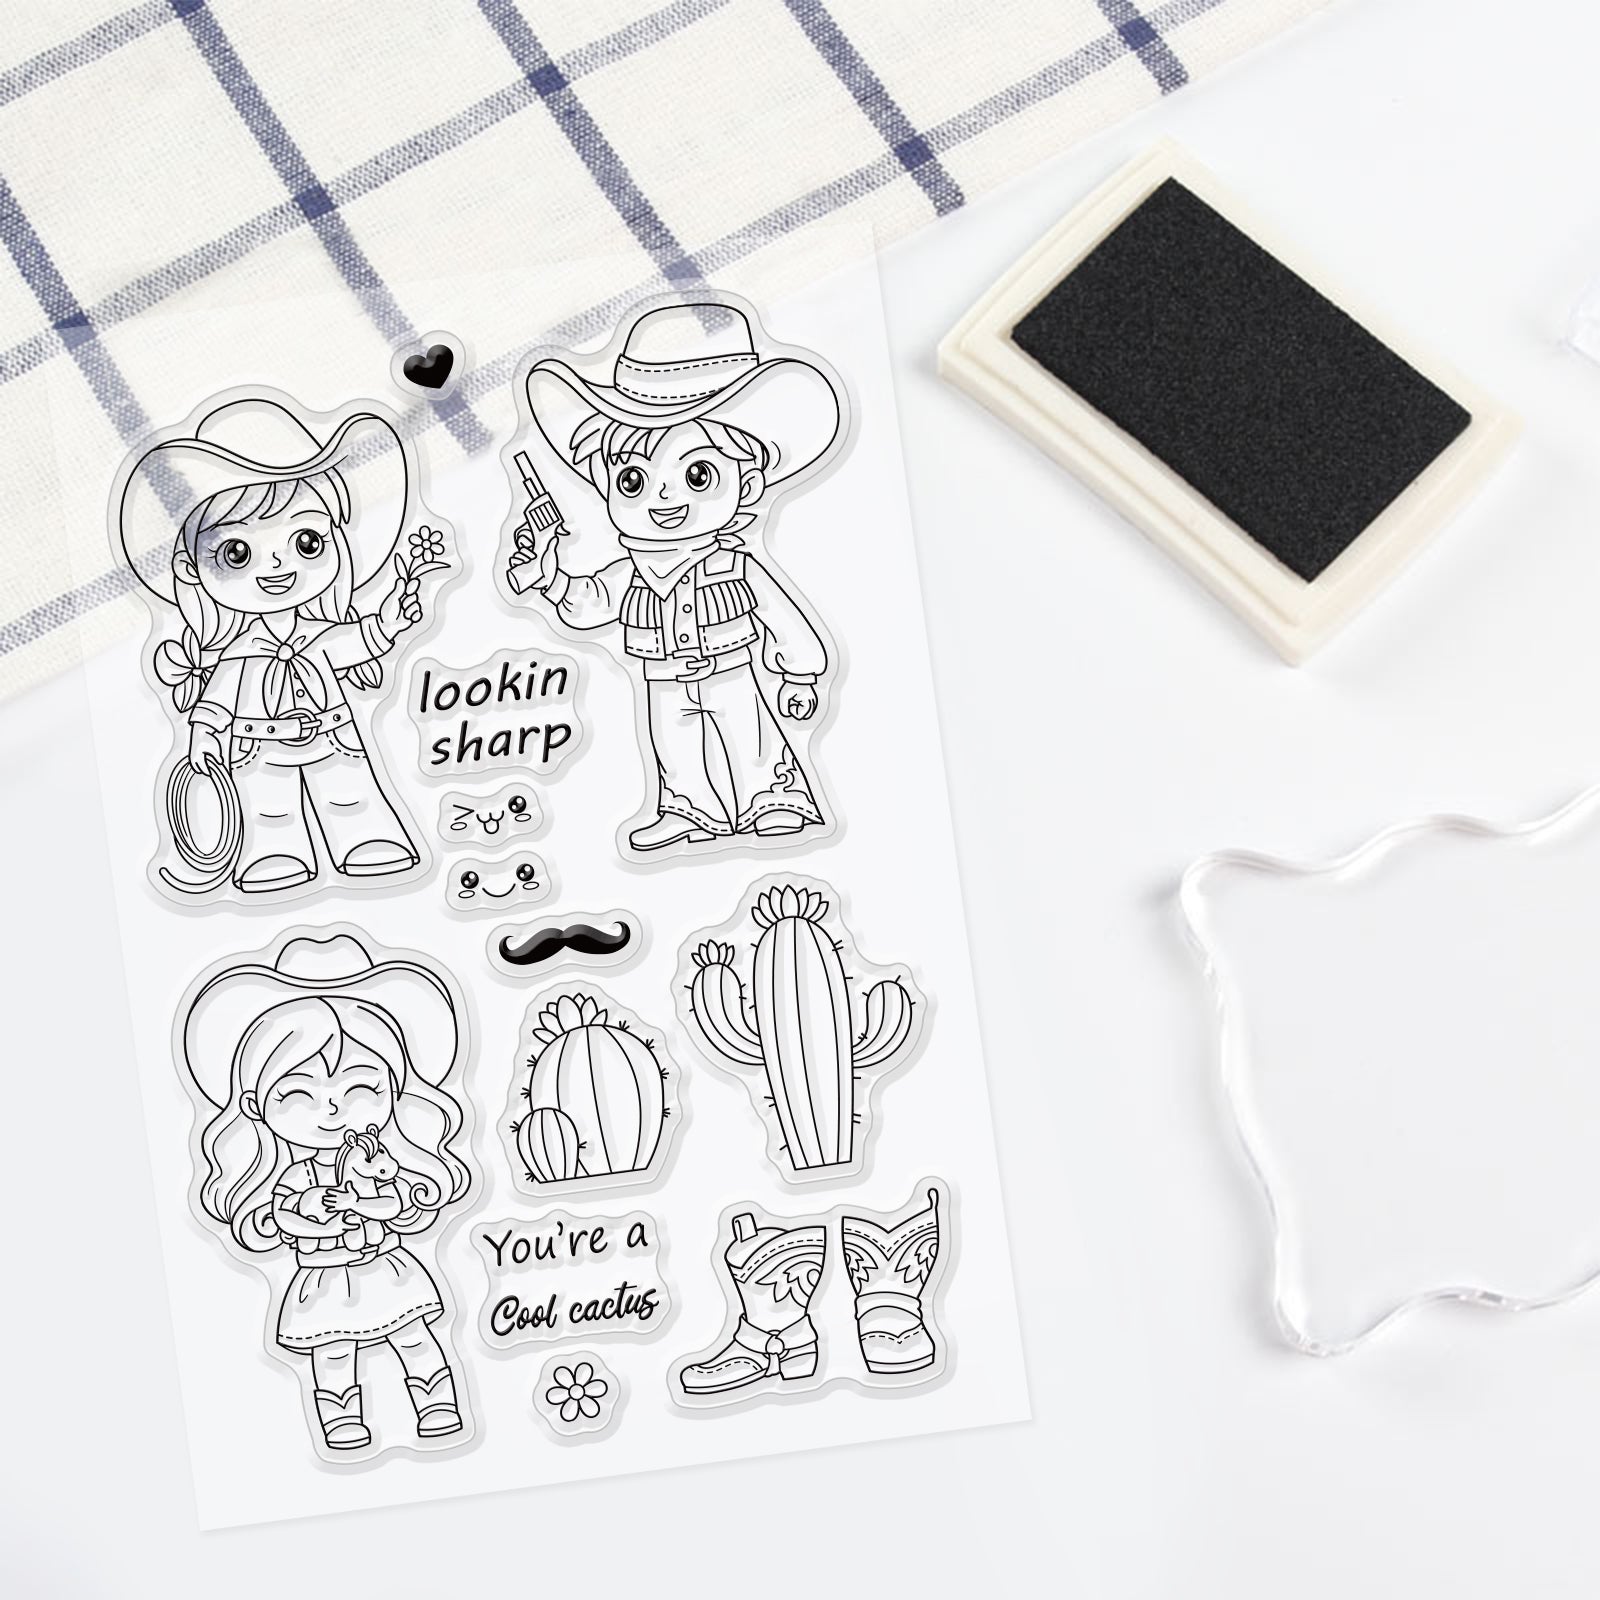 Globleland Cowboy, Tropical, Adventure, Cactus Clear Silicone Stamp Seal for Card Making Decoration and DIY Scrapbooking